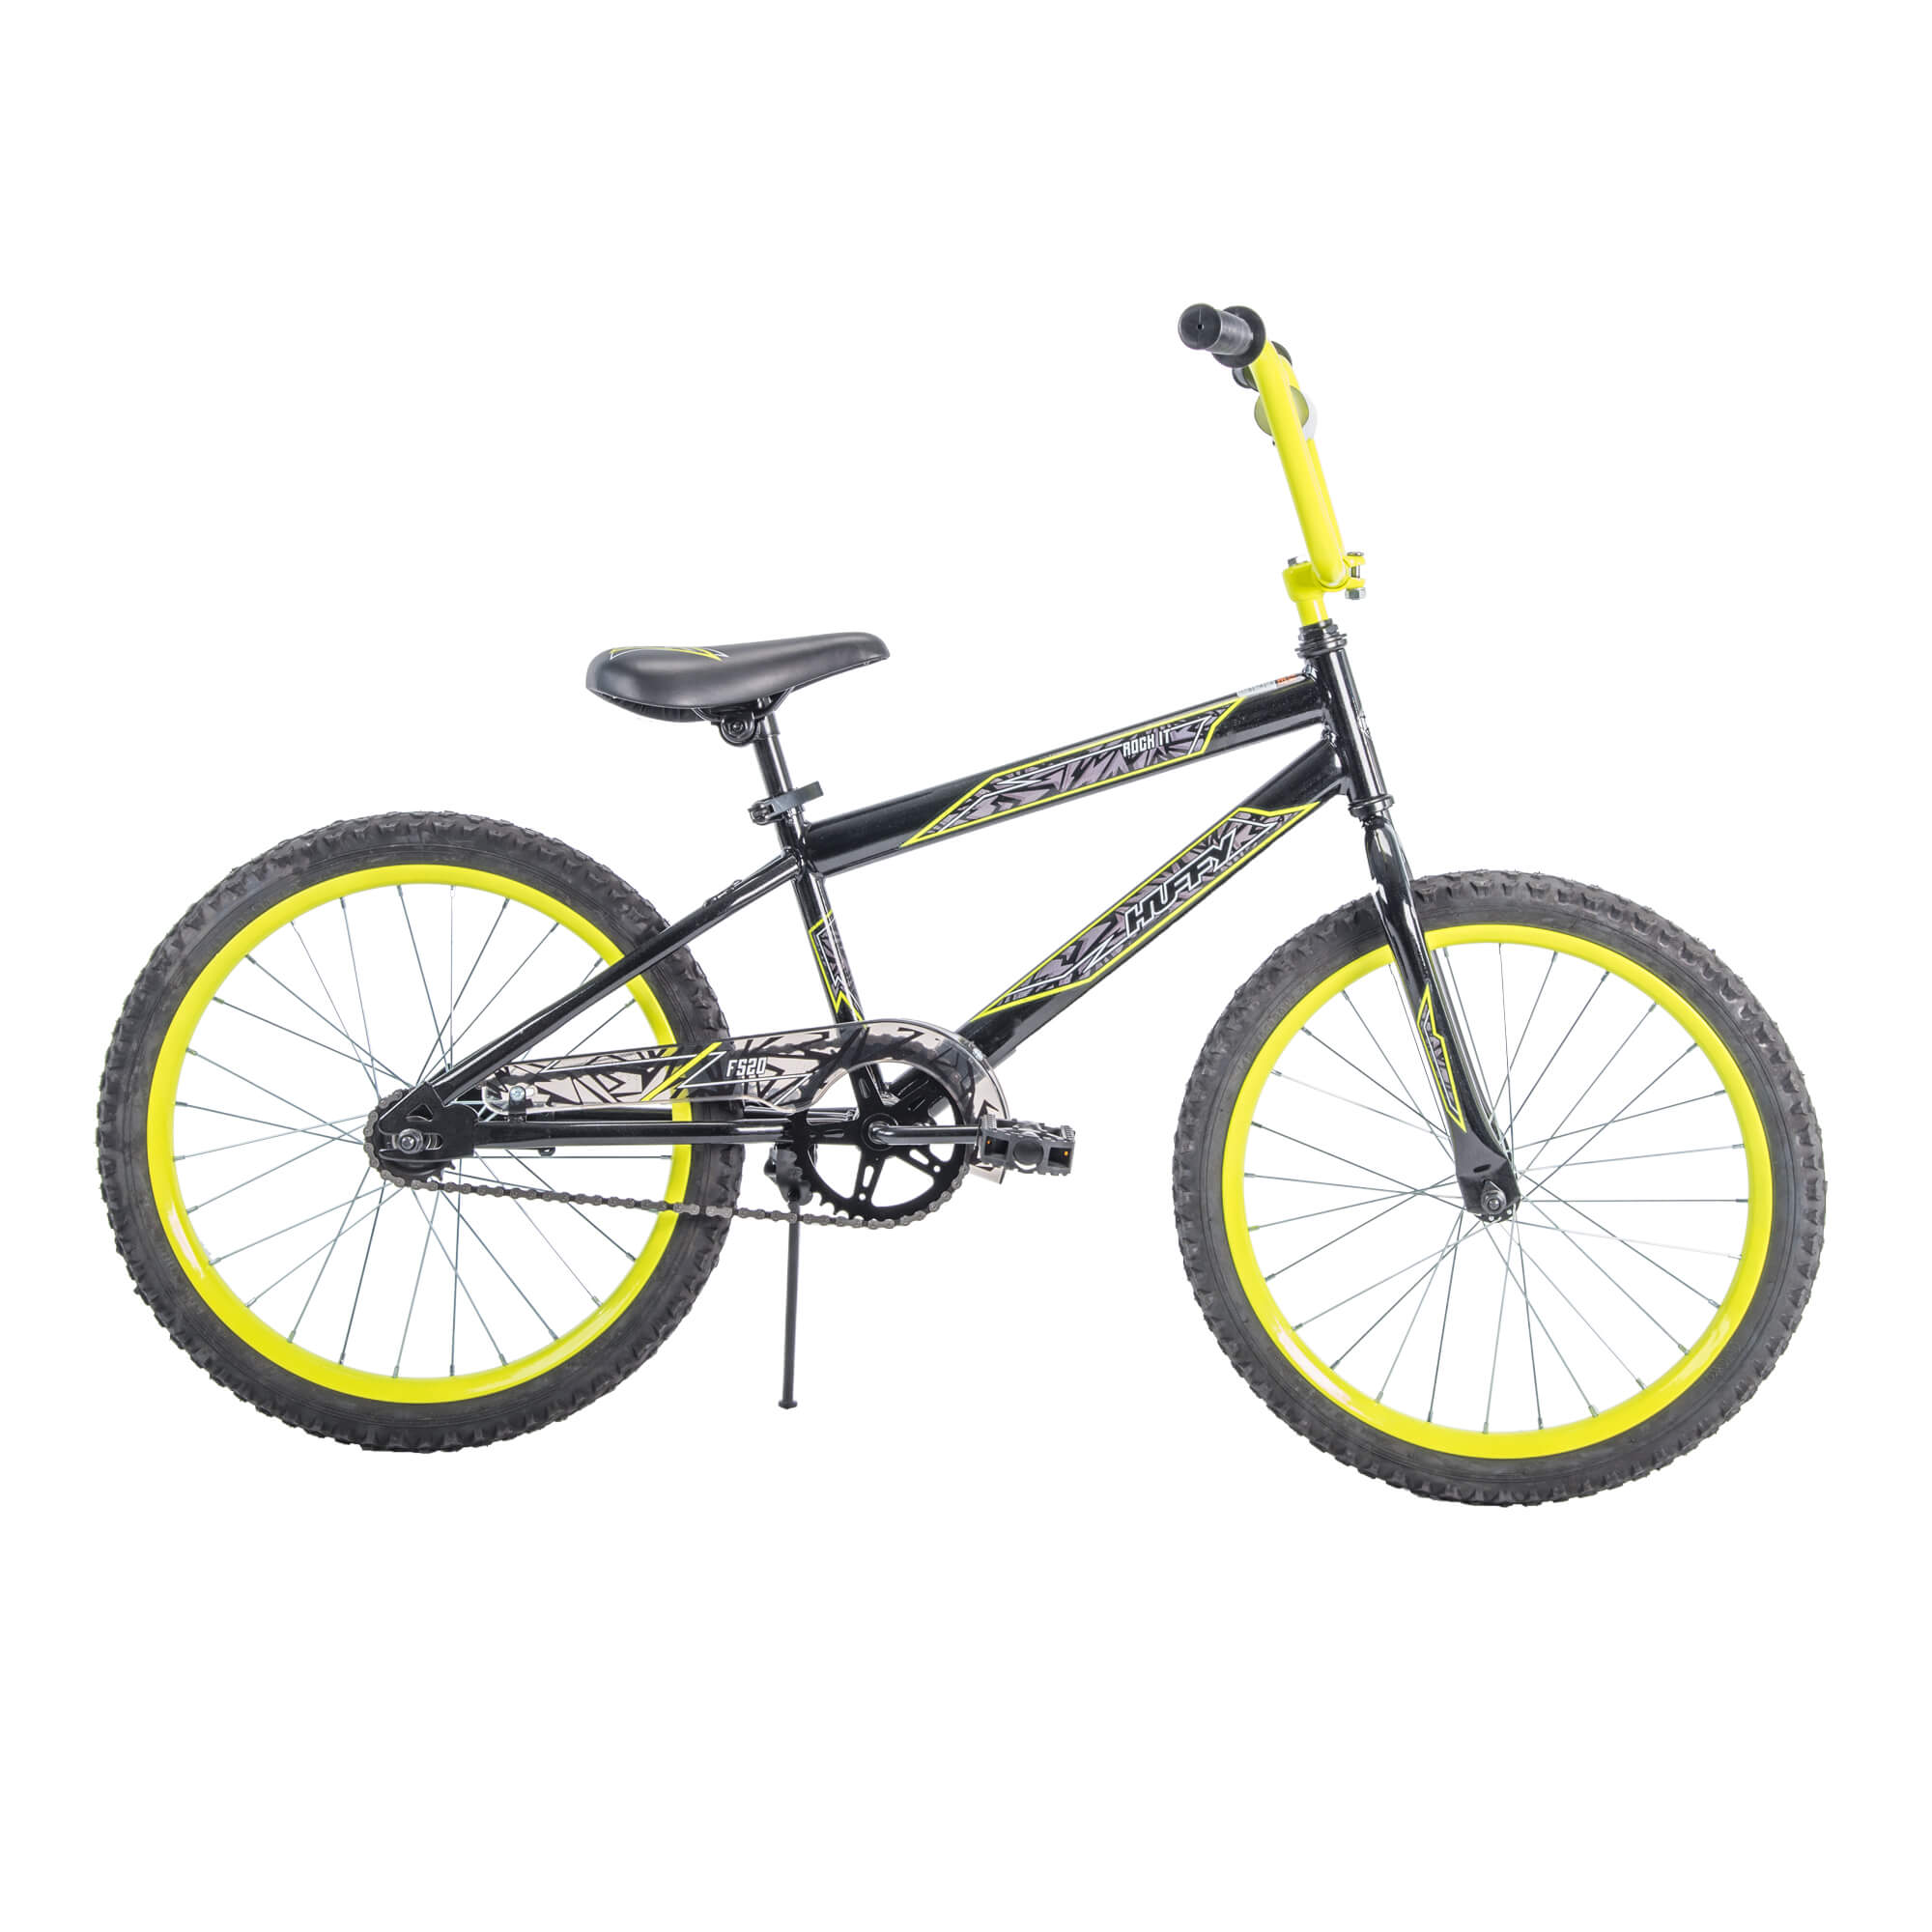 Huffy 20 In. Rock It Boys' Bike, Metallic Black with Neon Yellow Accents - image 5 of 5